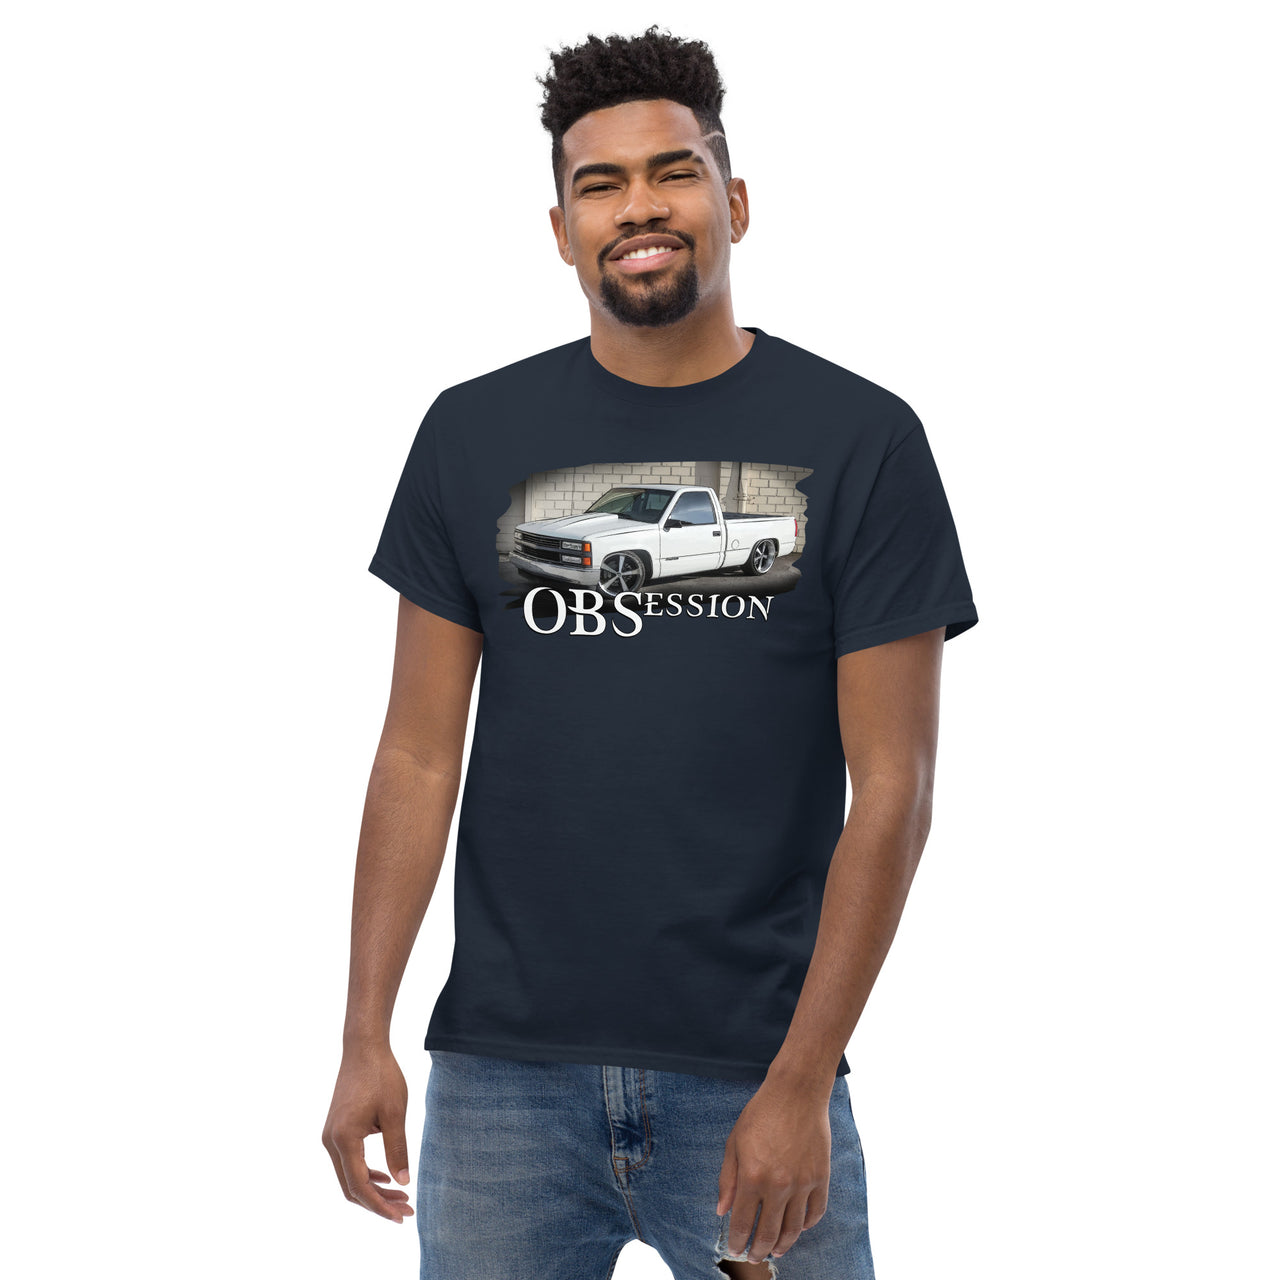 OBS Truck T-Shirt Lowered C1500 modeled in navy